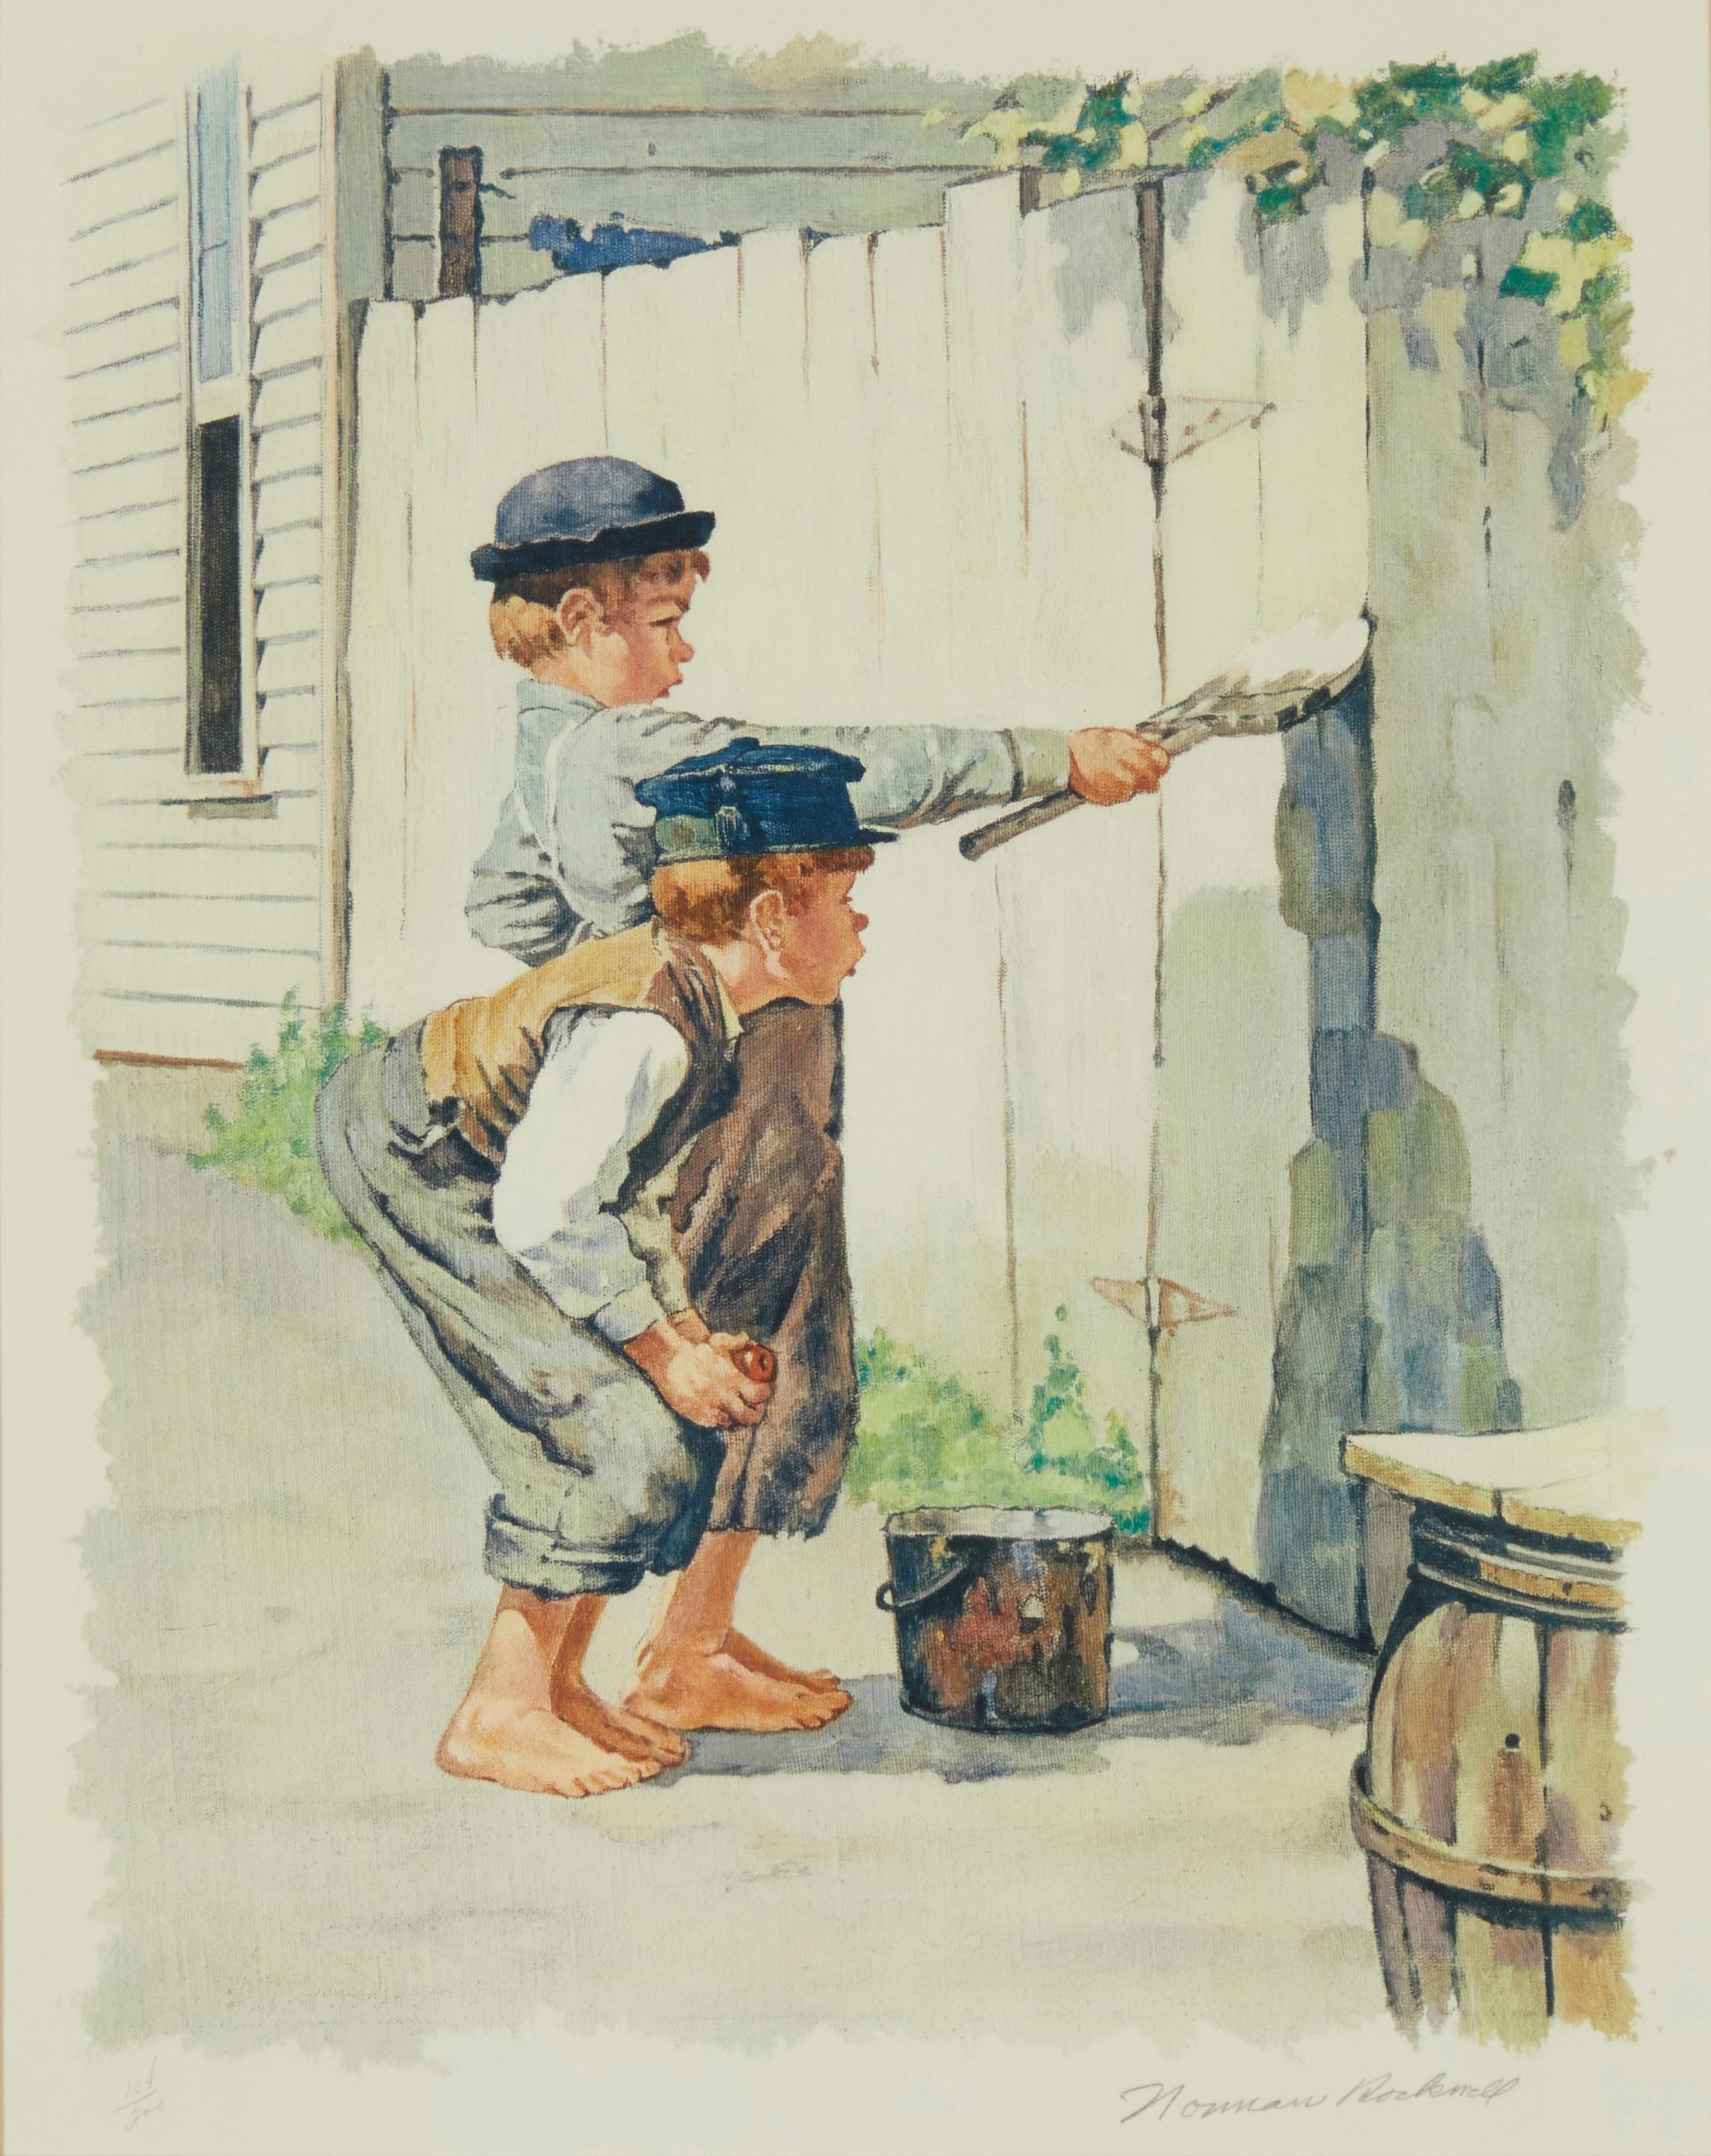 "Whitewashing the Fence" by Norman Rockwell